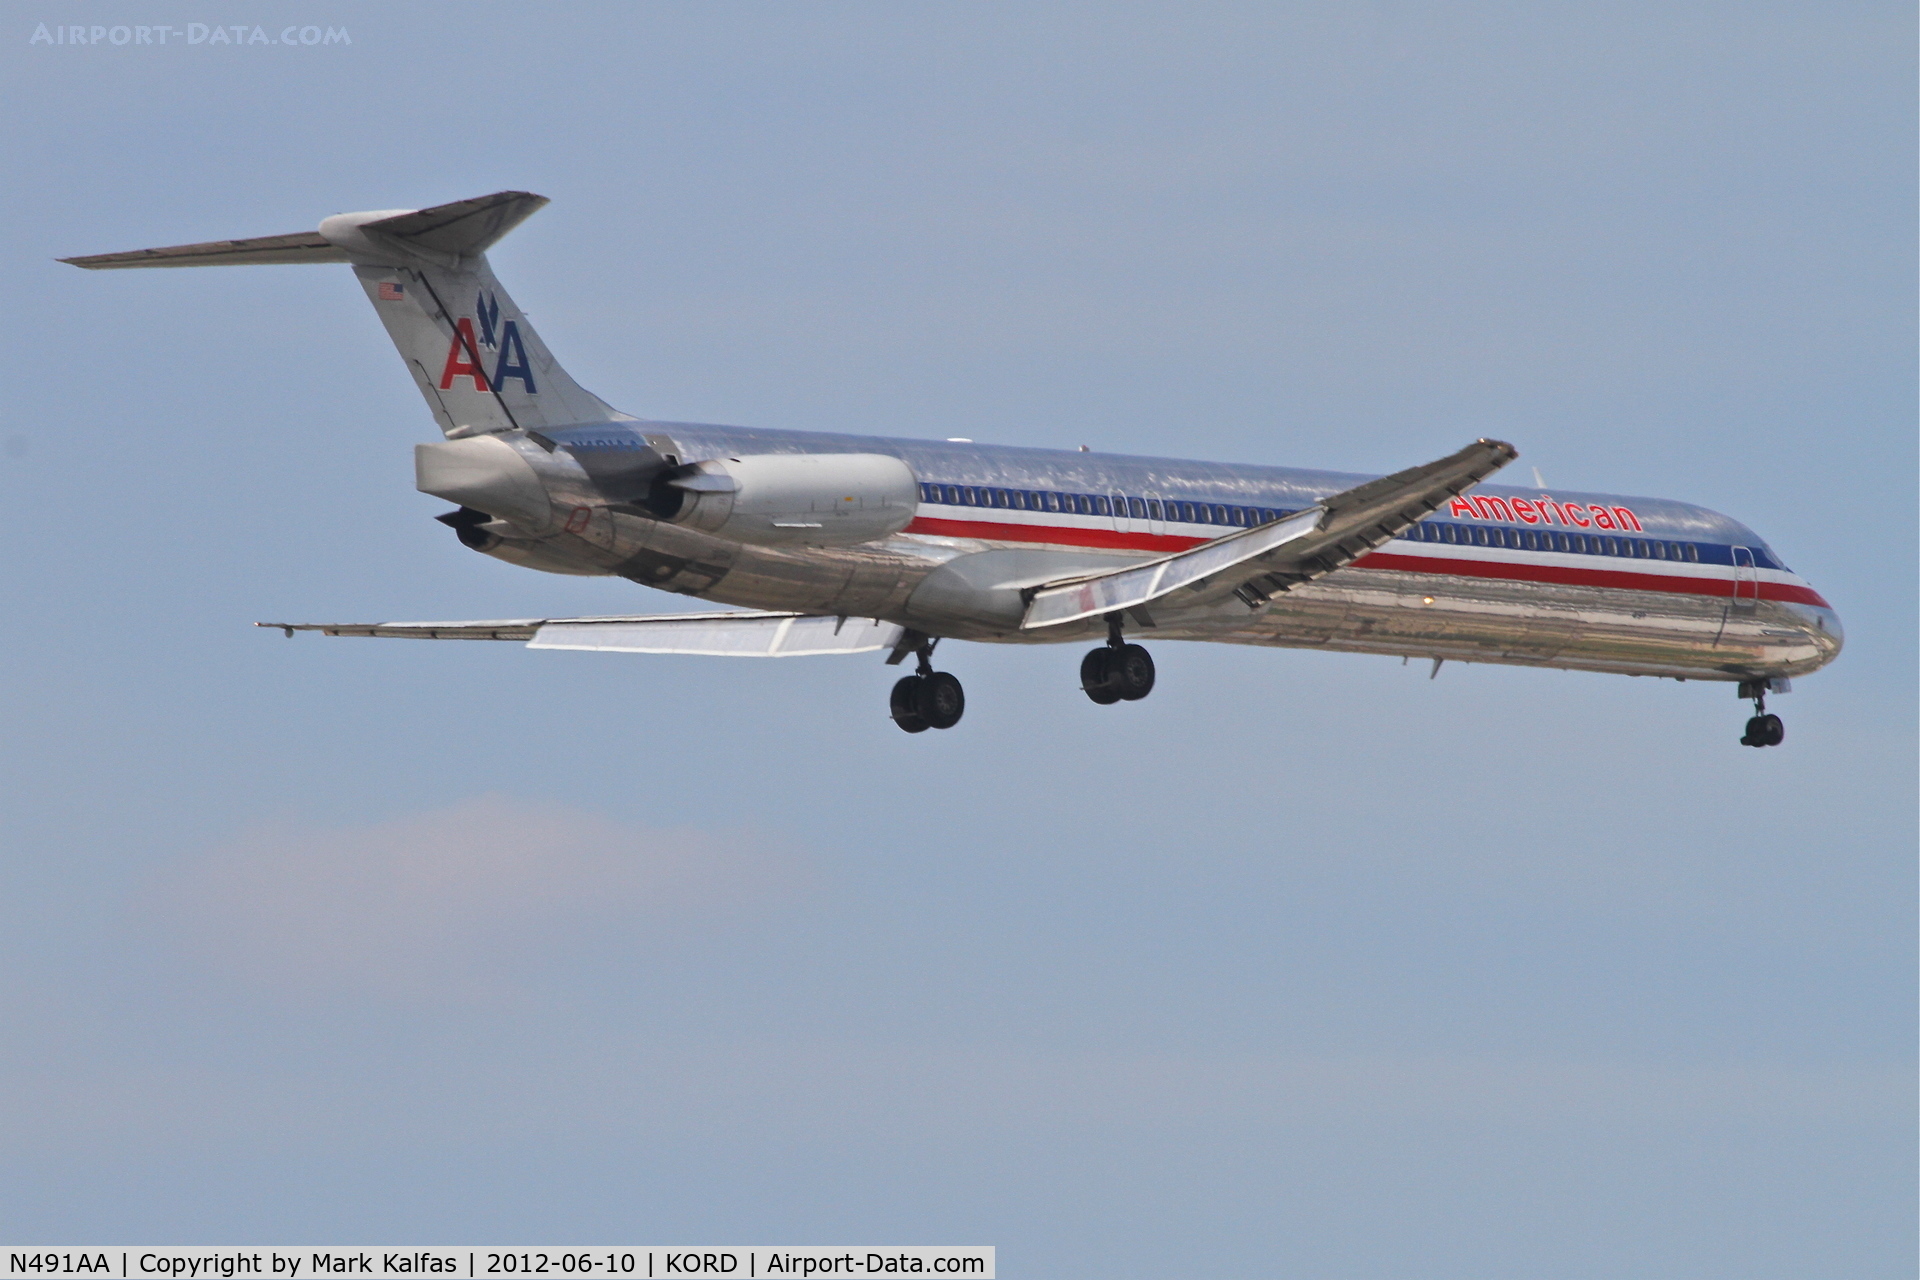 N491AA, 1989 McDonnell Douglas MD-82 (DC-9-82) C/N 49684, American Airlines Mcdonnell Douglas DC-9-82, AAL1634 arriving from KTUS, RWY 10 approach KORD.